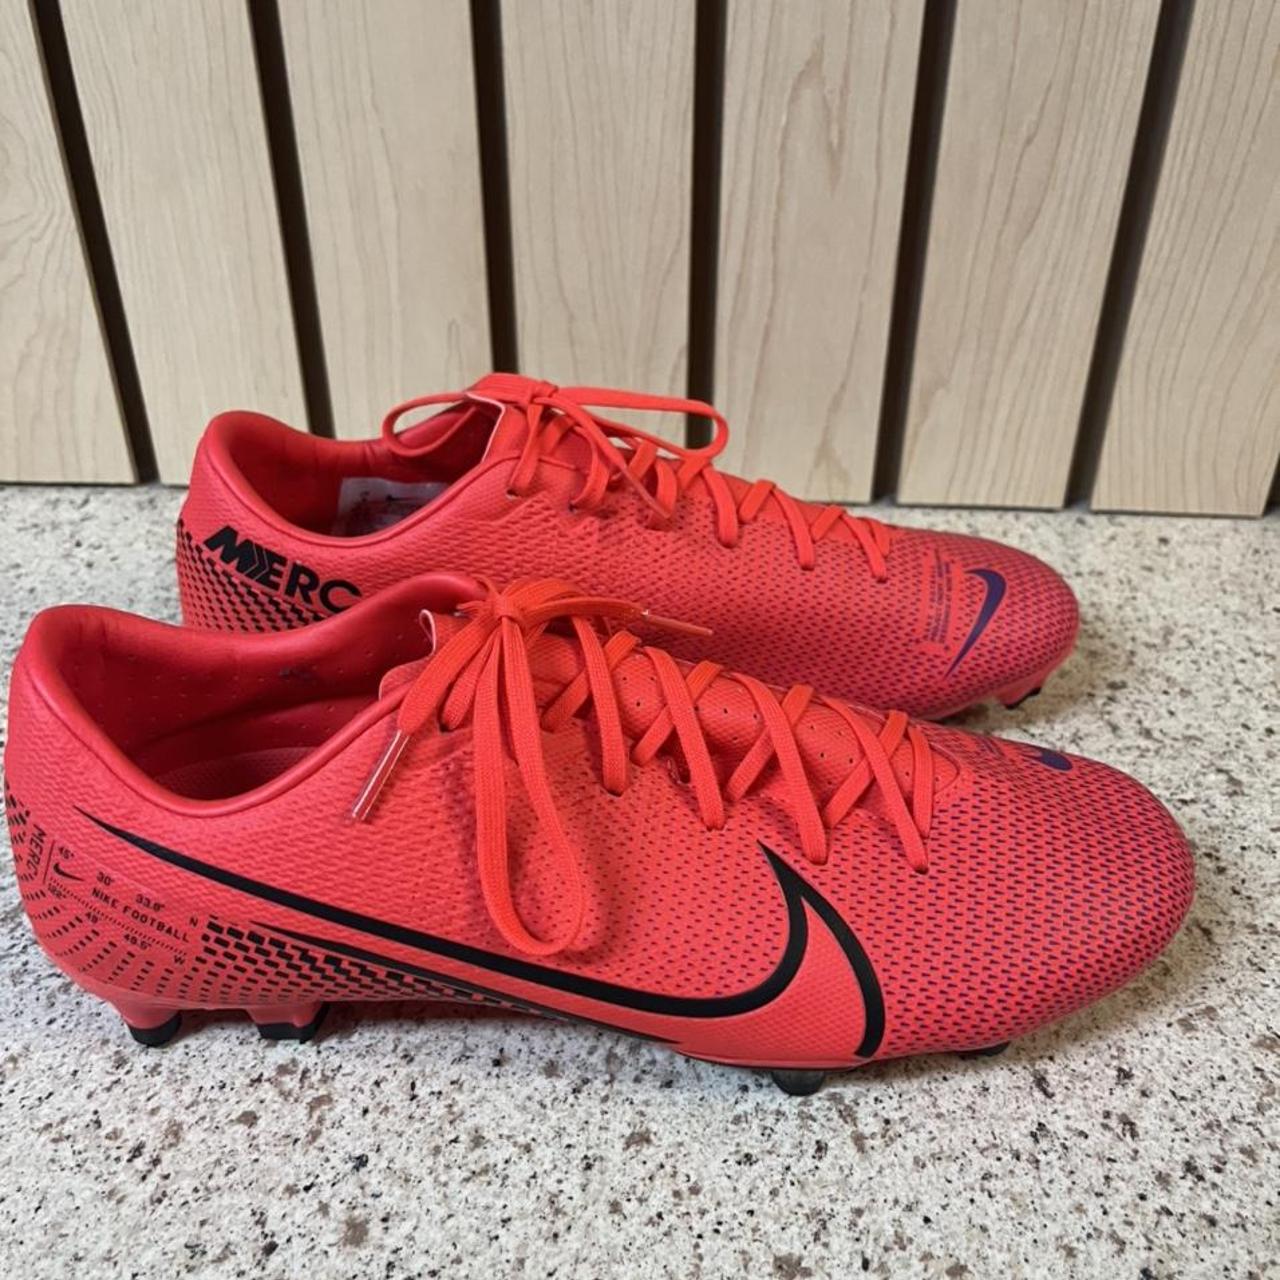 Product Image 2 - Nike Men's Football Boots, Red